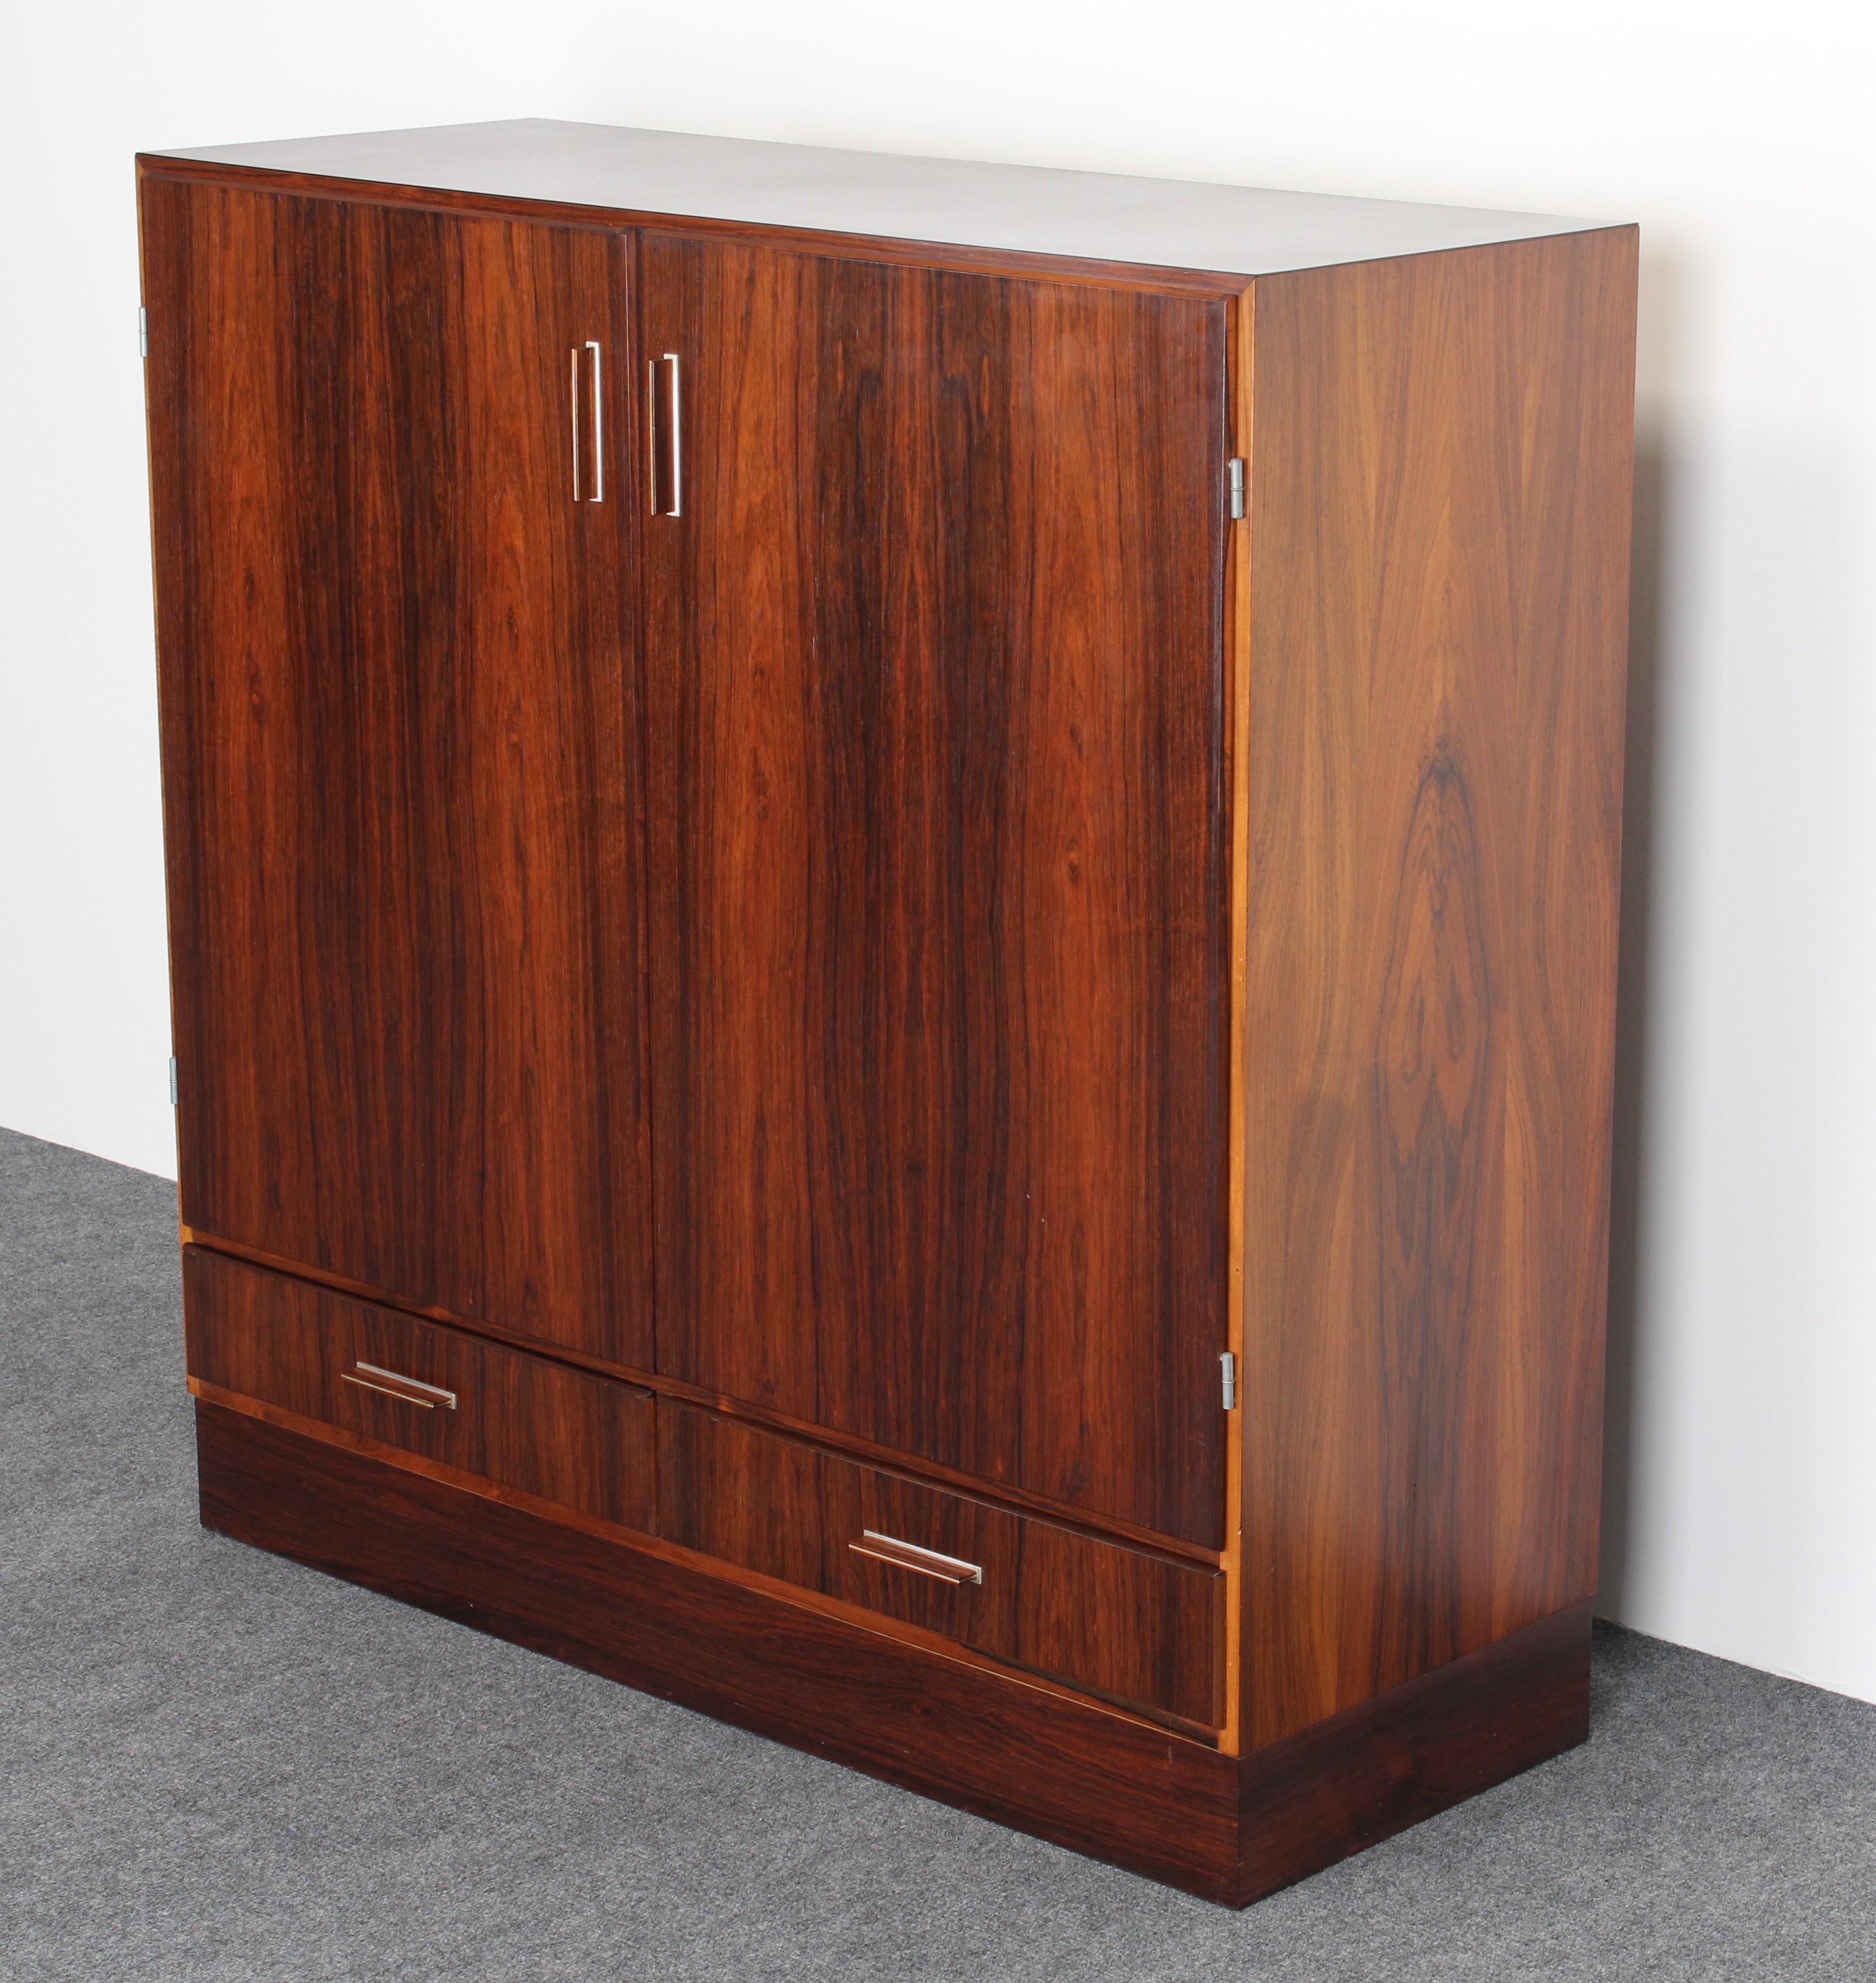 A stunning Danish modern midcentury dry bar in rosewood. Designed by Axel Christiansen for ACO Mobler. Bar has aluminum handles, built in shelf for bottles, a pull-out shelf, adjustable shelf and two drawers for plenty of storage. Interior bar